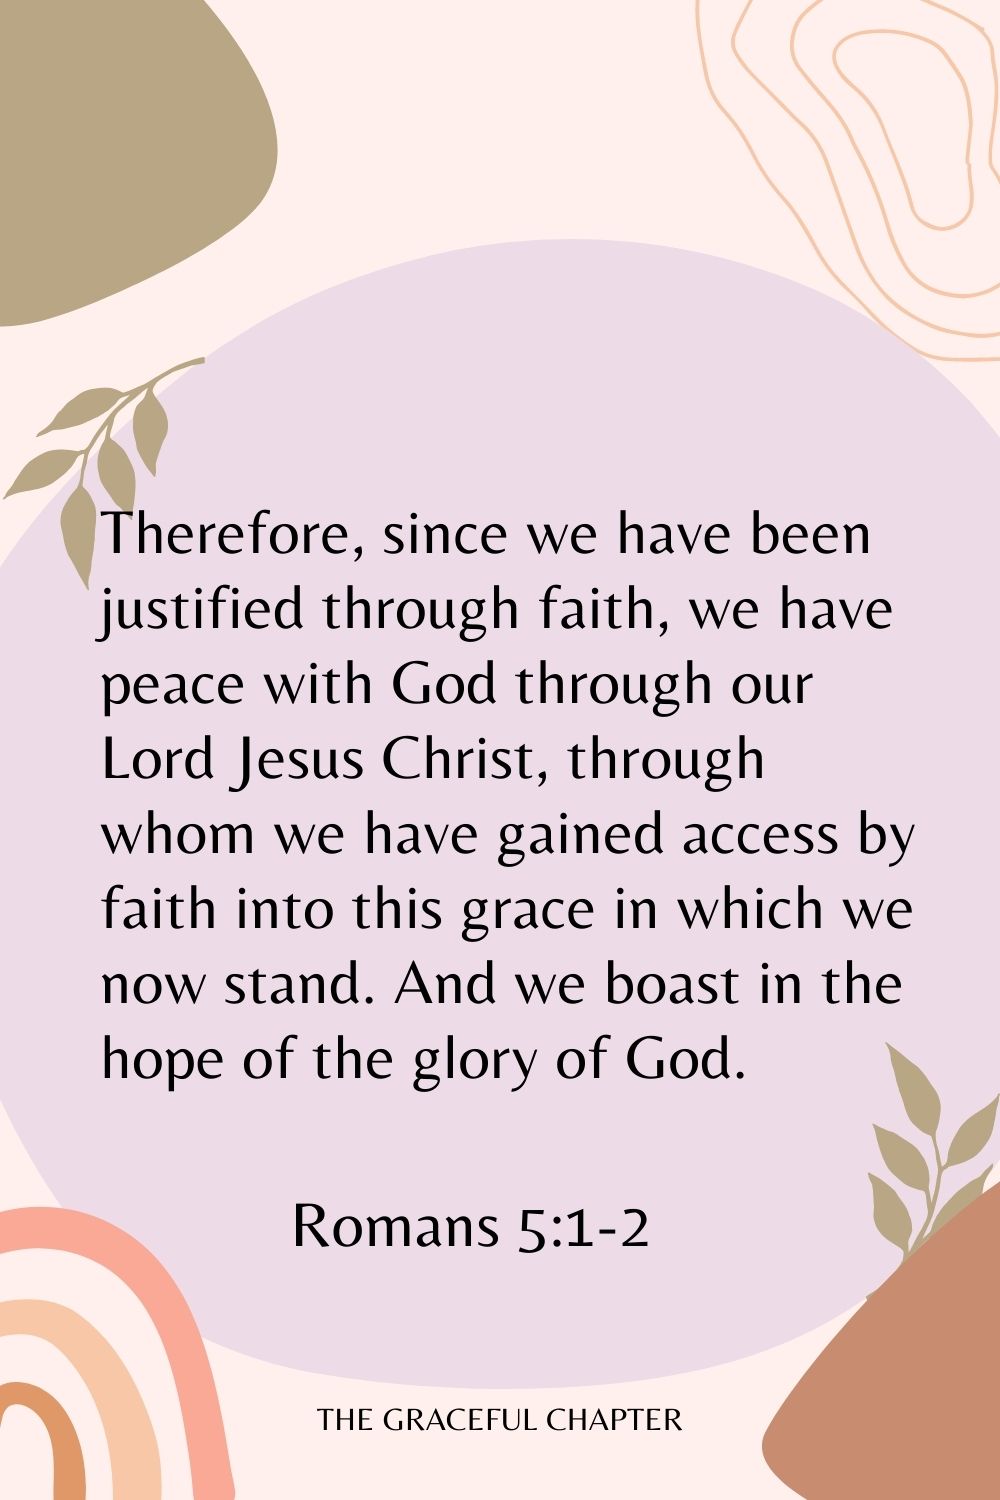 Therefore, since we have been justified through faith, we have peace with God through our Lord Jesus Christ, through whom we have gained access by faith into this grace in which we now stand. And we boast in the hope of the glory of God. Romans 5:1-2